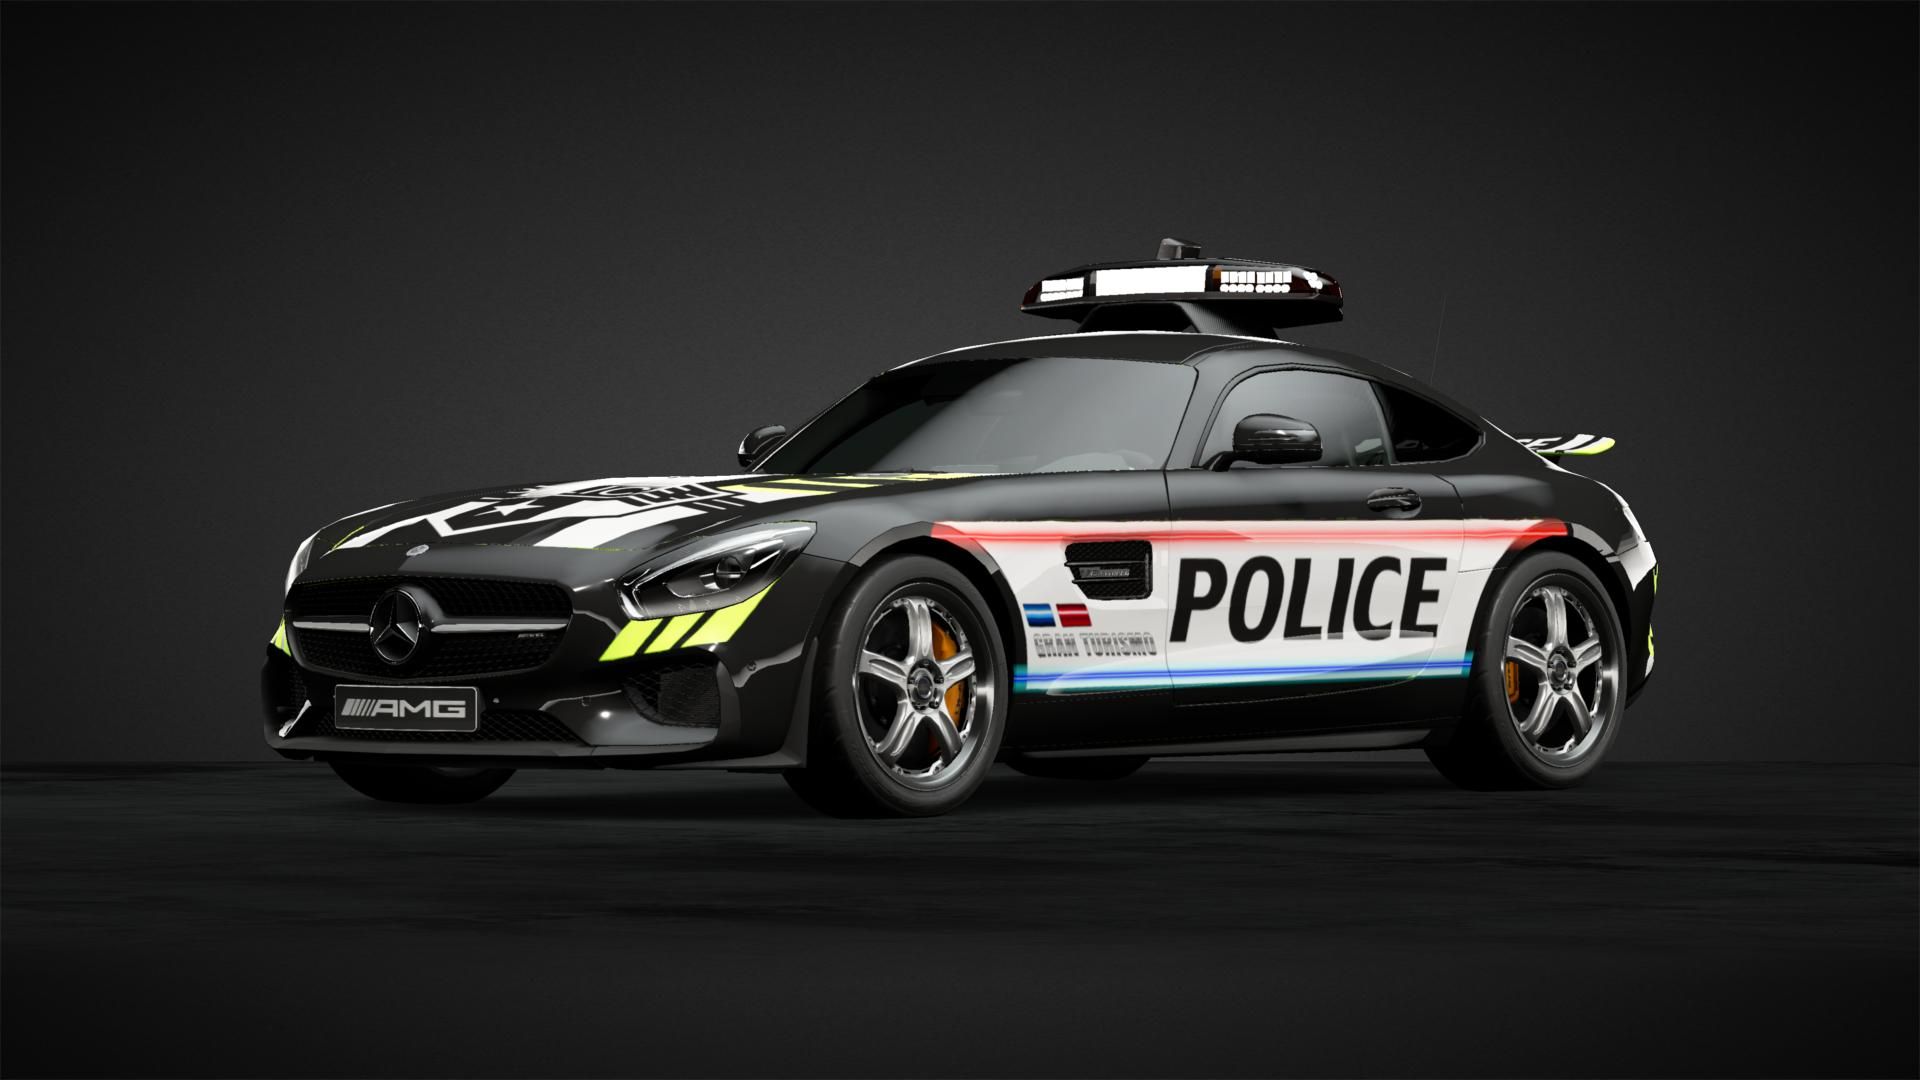 AMG Cop Car Livery by atomiclemon86. Community. Gran Turismo Sport